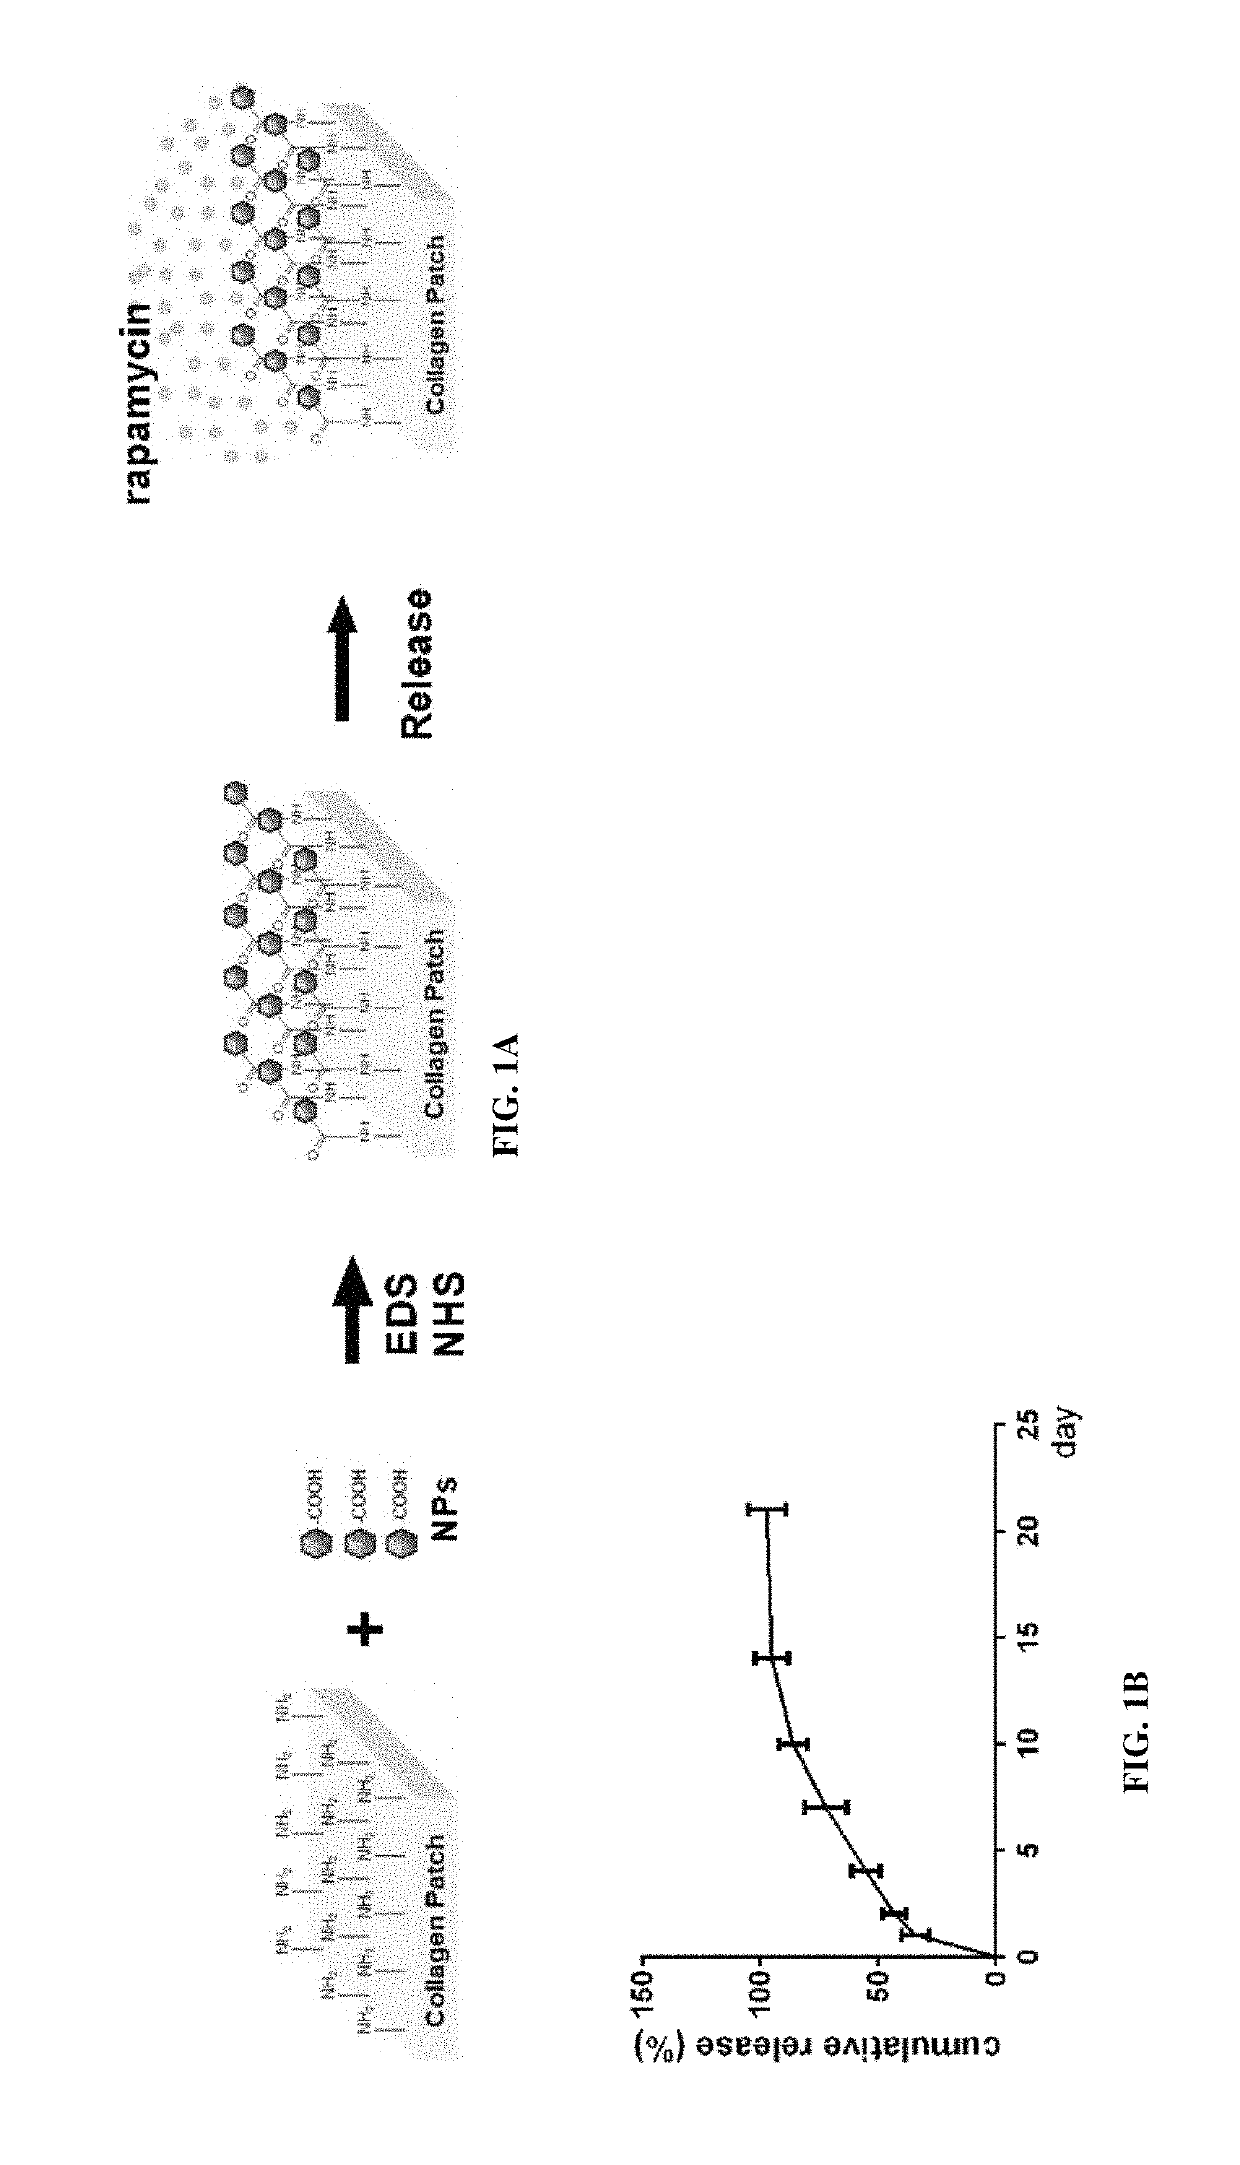 Particle conjugated prosthetic patches and methods of making and using thereof